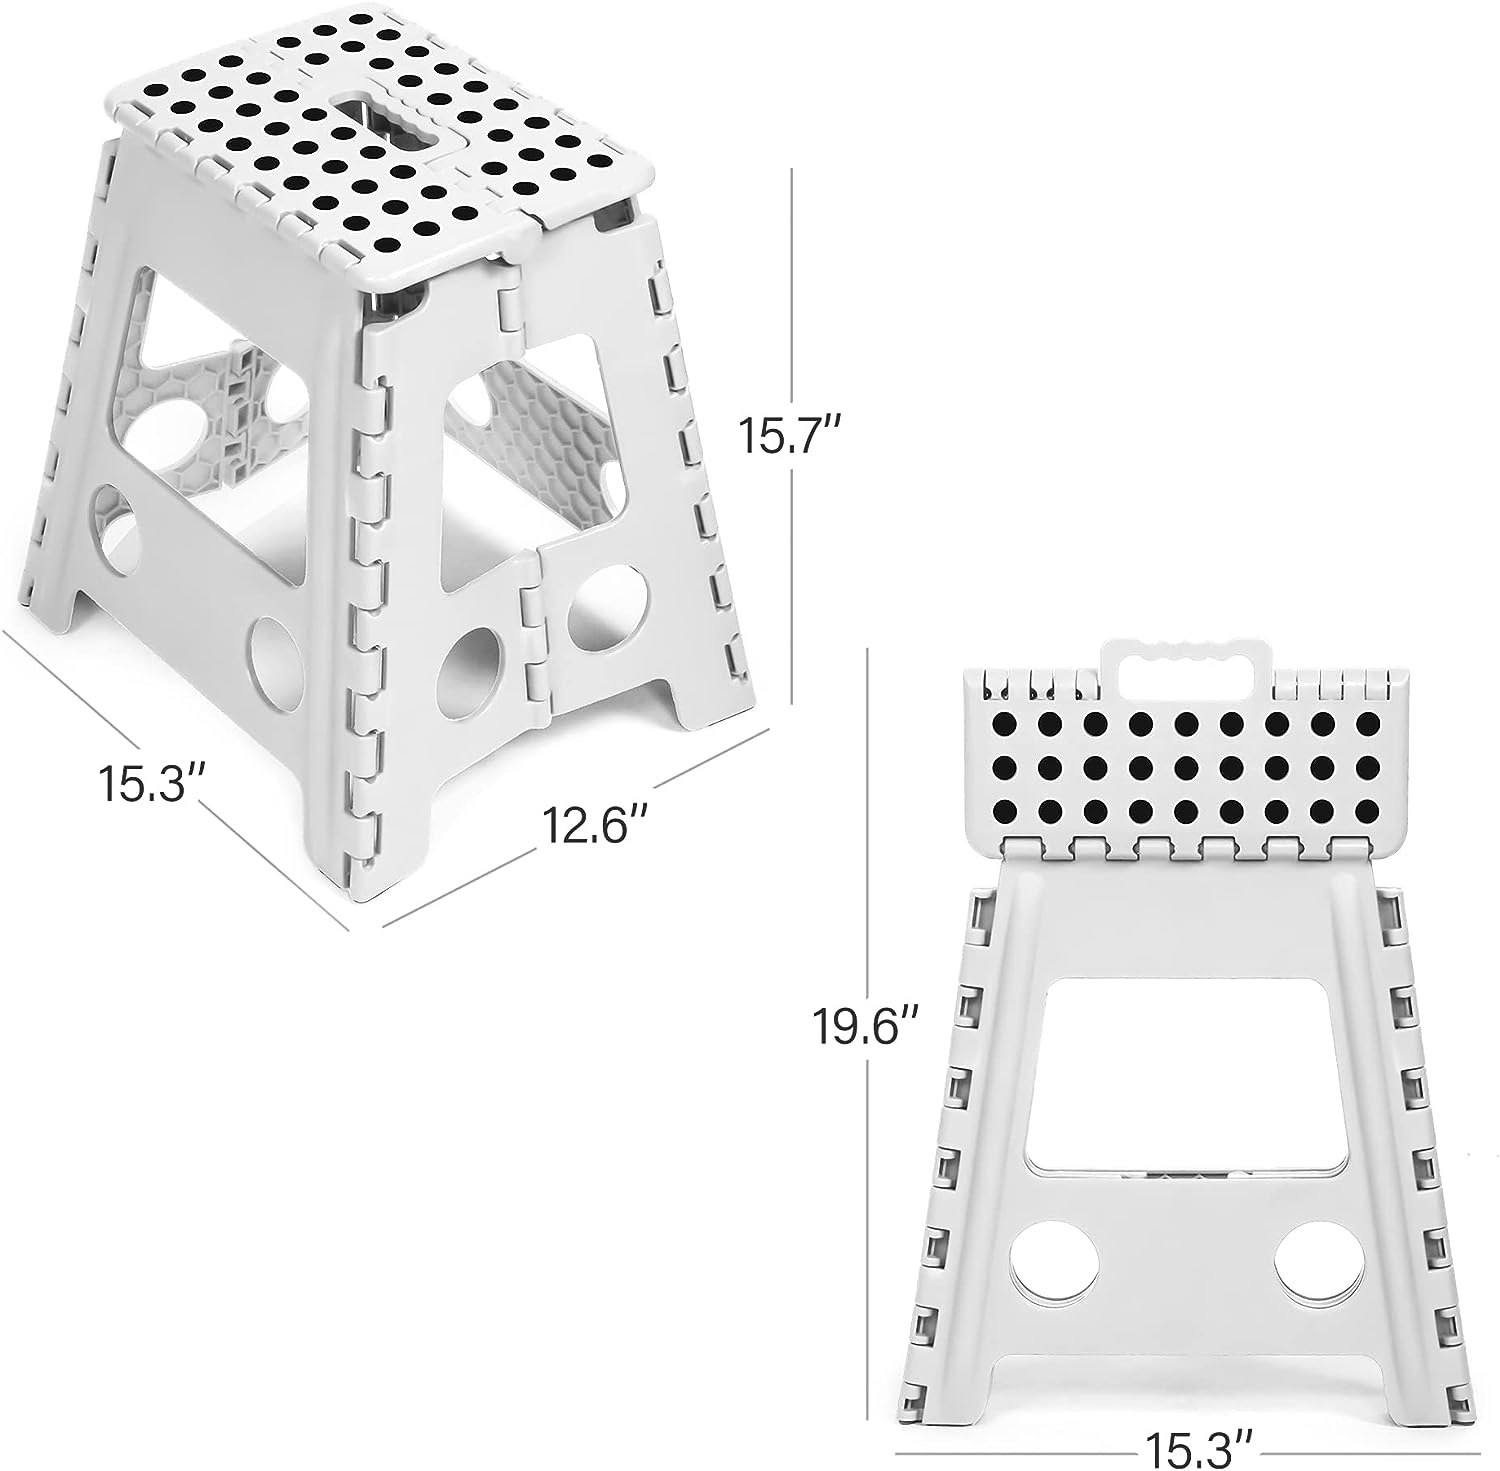 Set of 2 Folding Step Stool 15.7" with Non-Slip Surface and Portable Handle, White